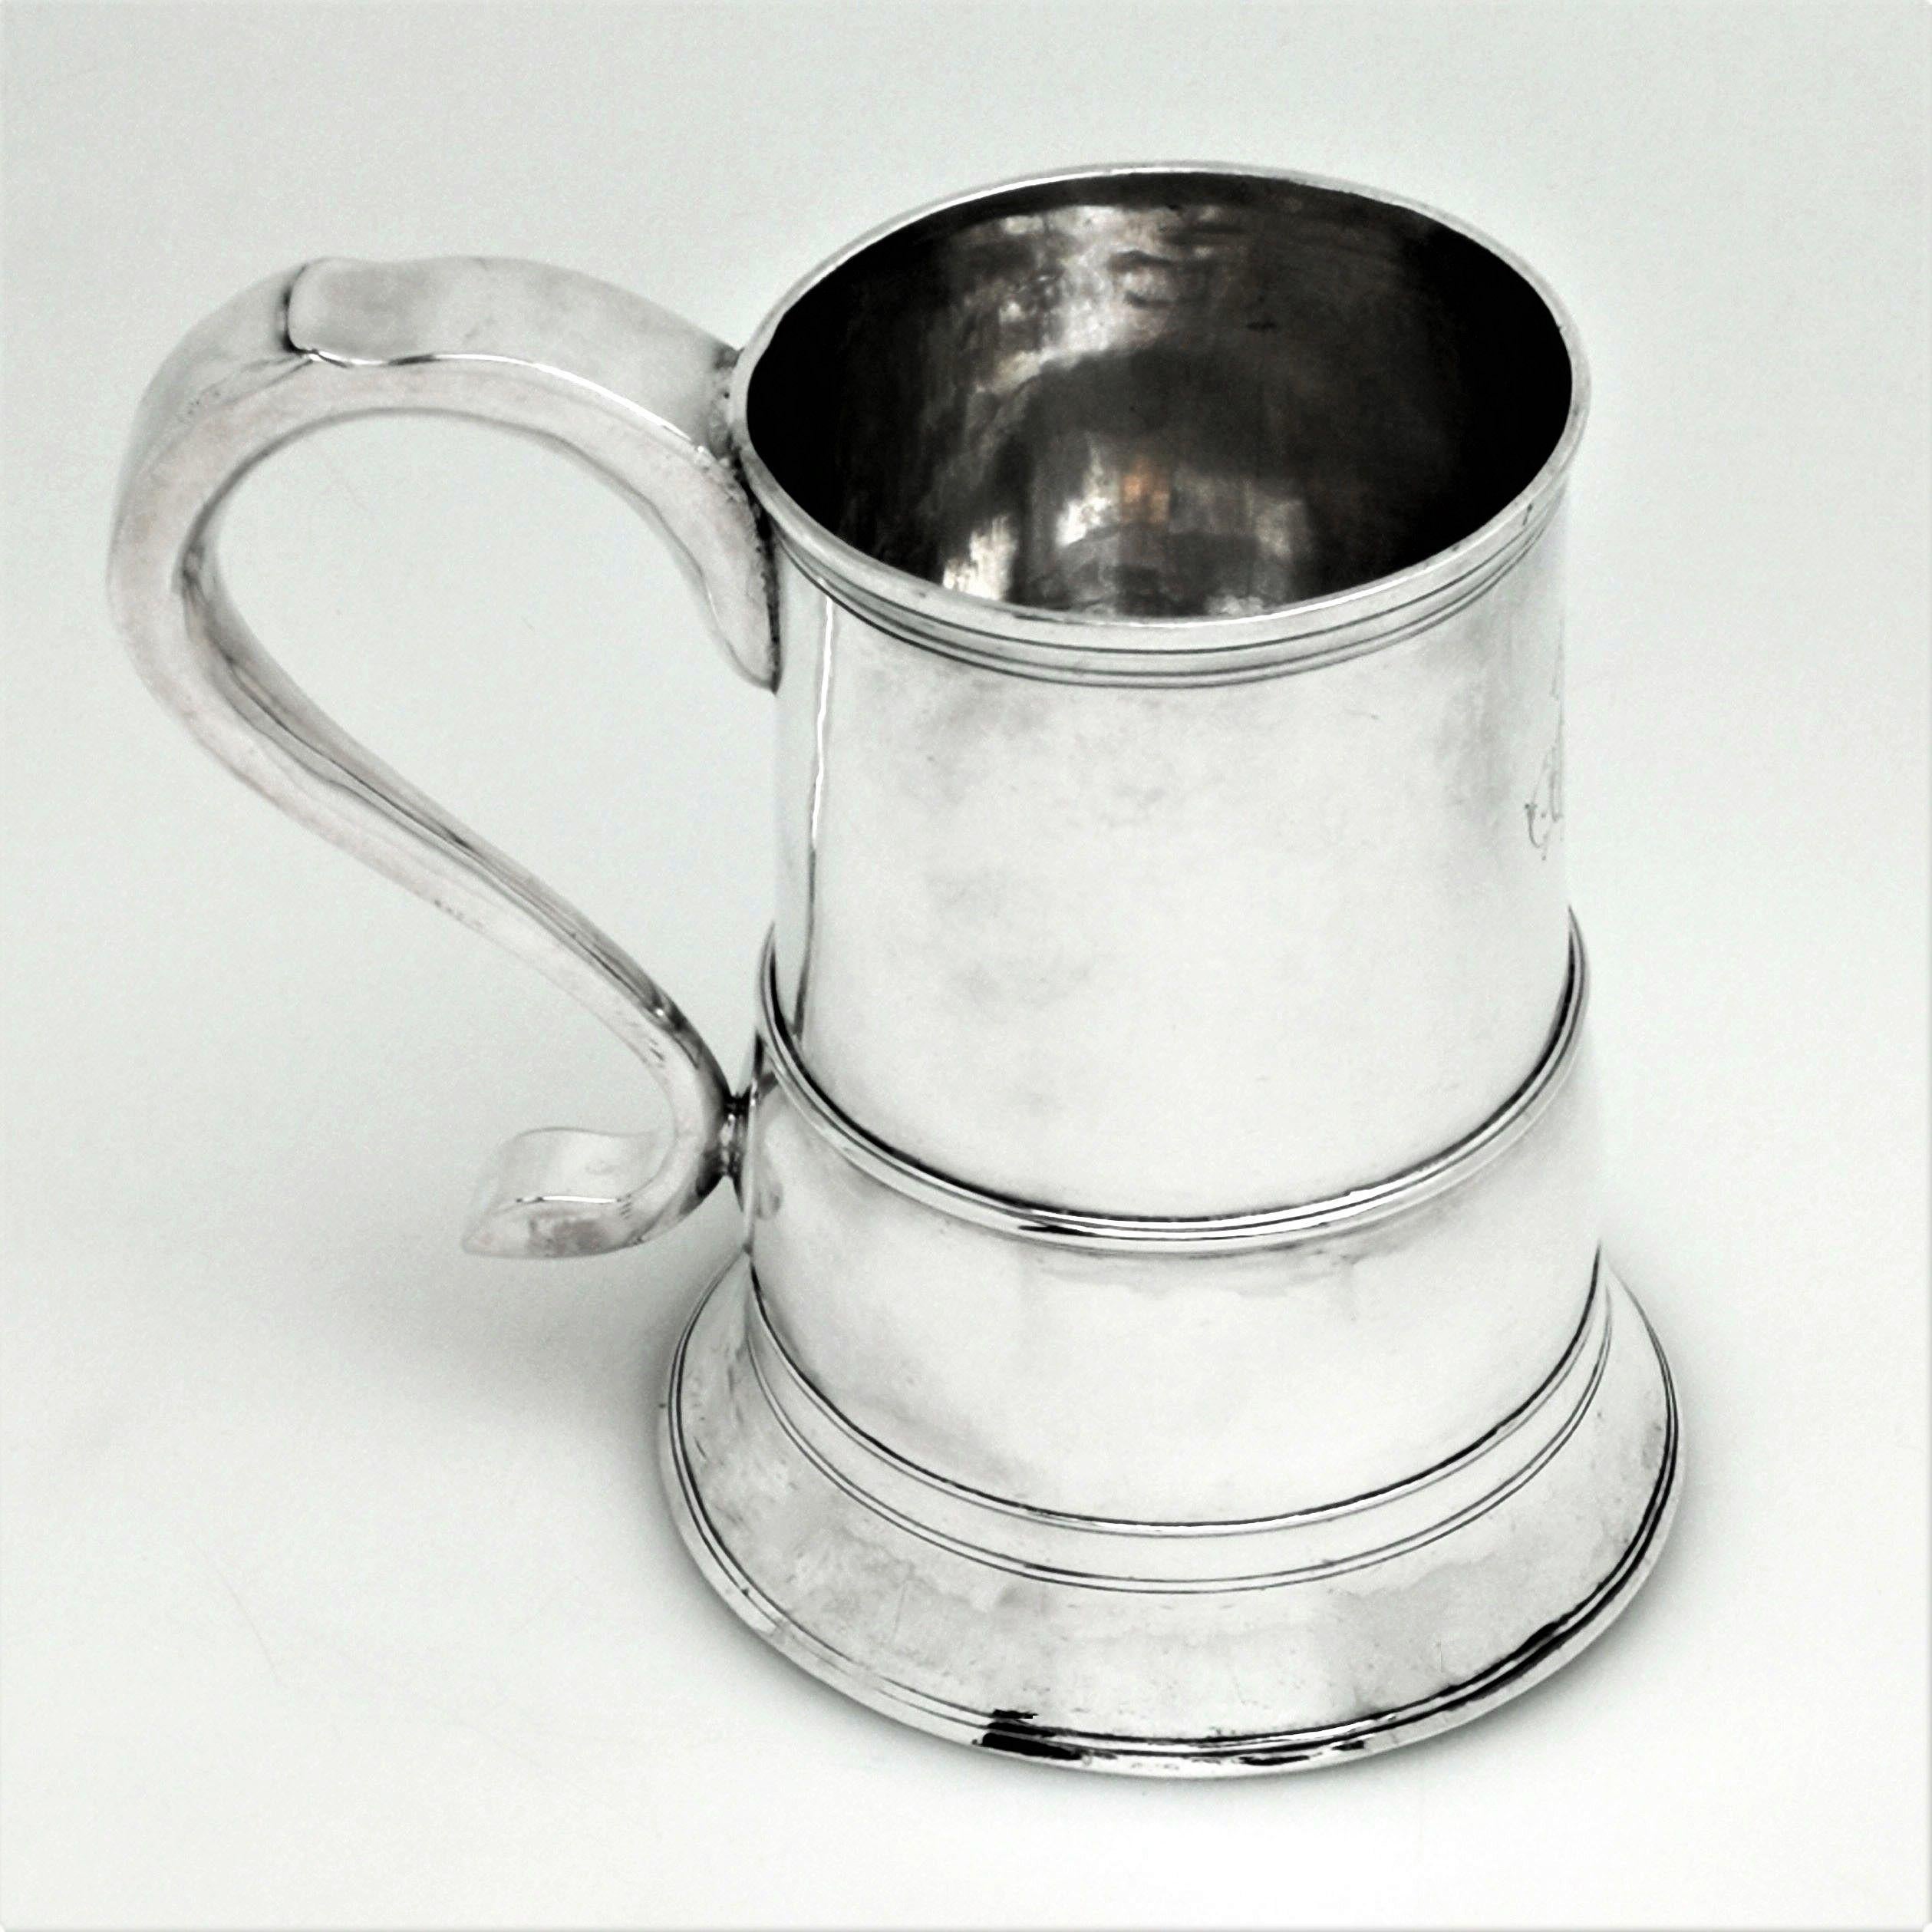 An impressive antique George III solid silver beer mug / tankard. This tankard has an unusual bellied band around the base of the body, deviating from the traditional straight sided design. This bellied band allows for an increased capacity while